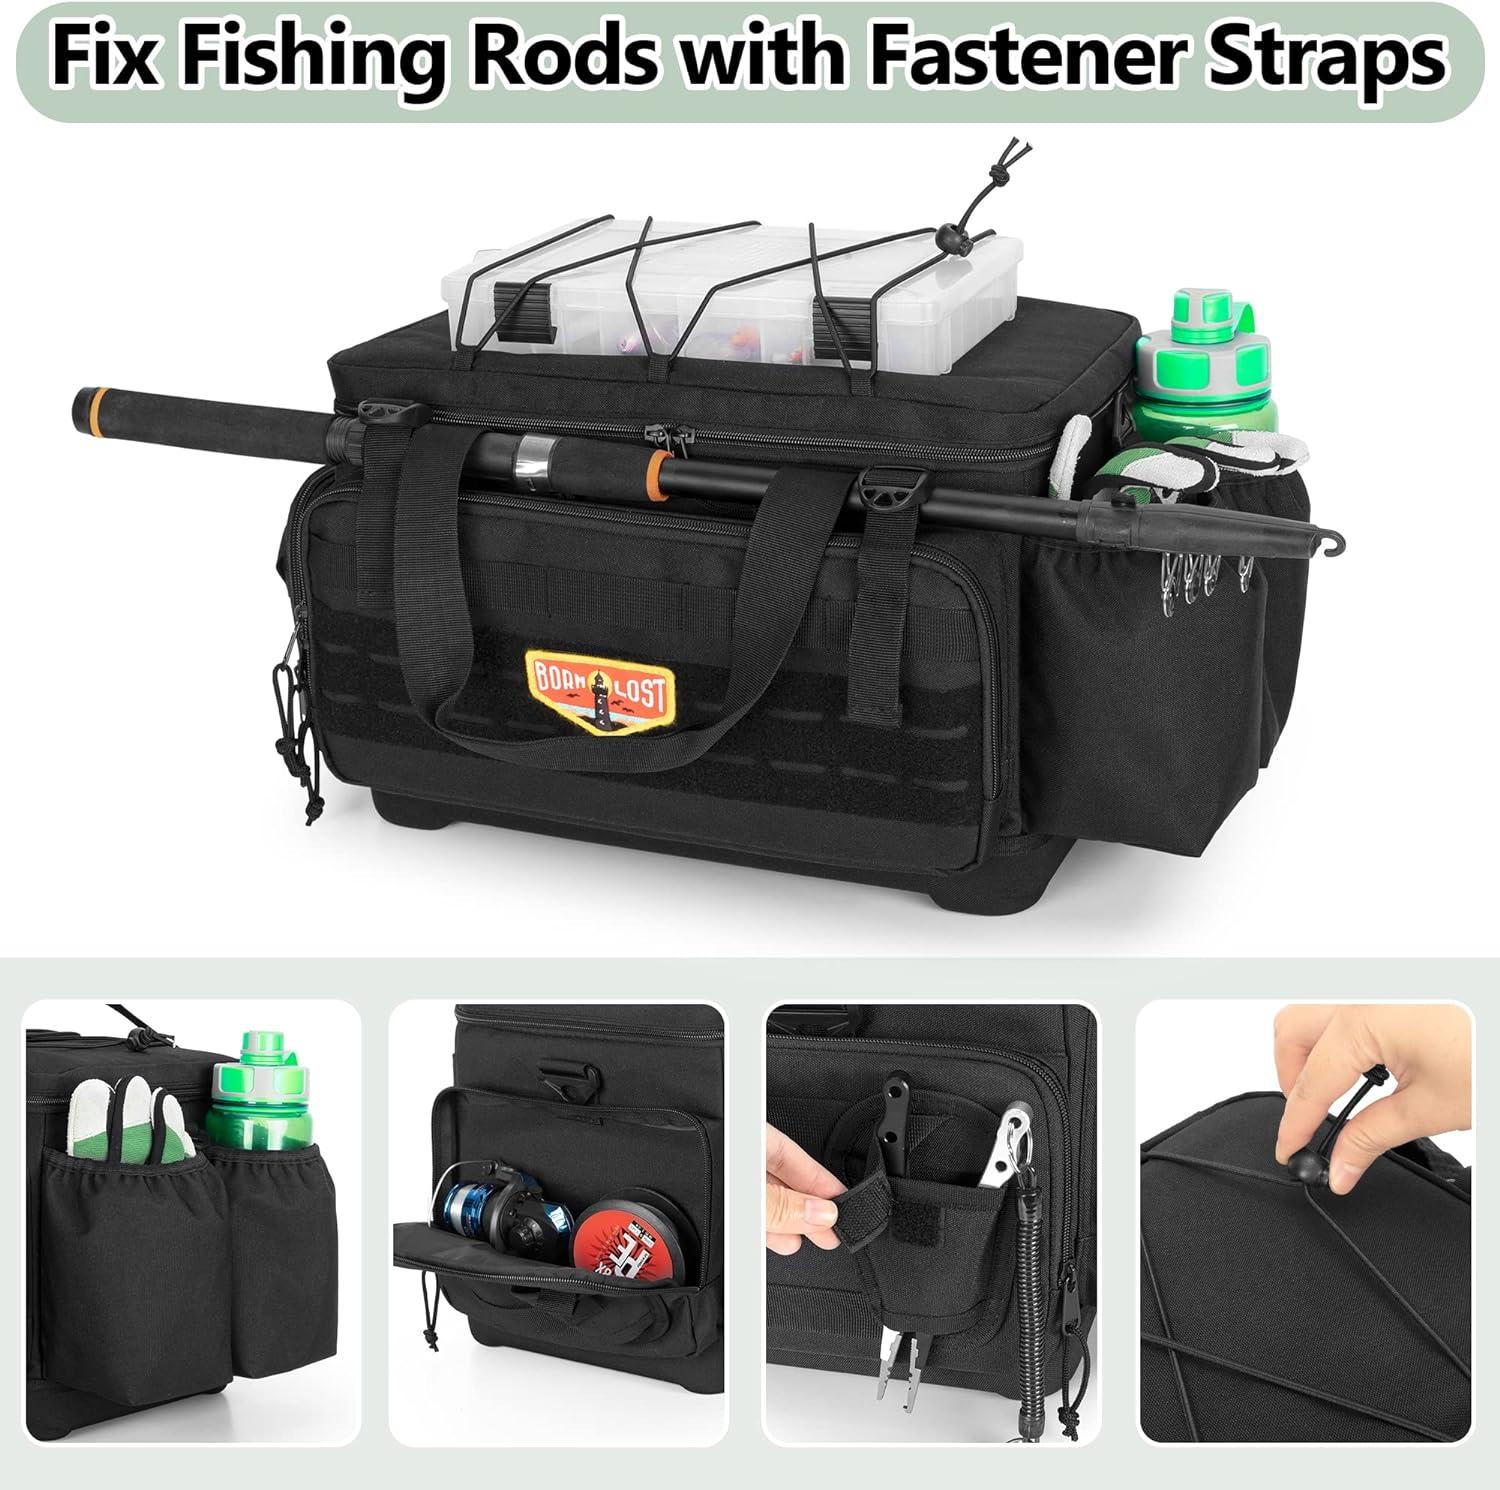 Men Fishing Tackle and Rod Holder Waterproof Storage Bag with Non